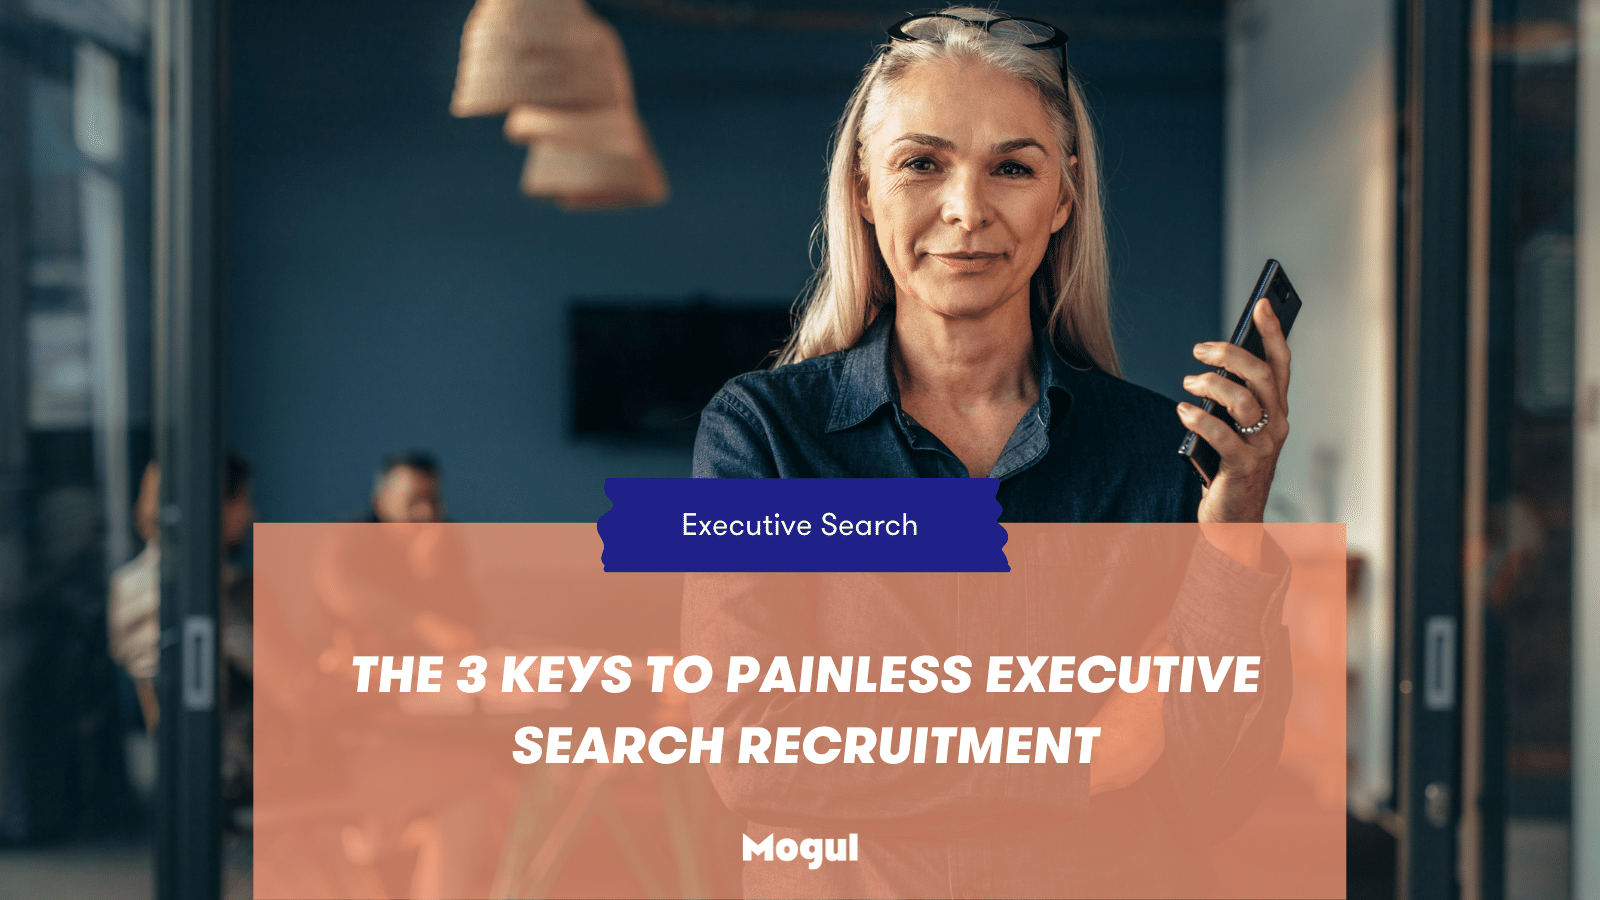 The 3 Keys to Painless Executive Search Recruitment